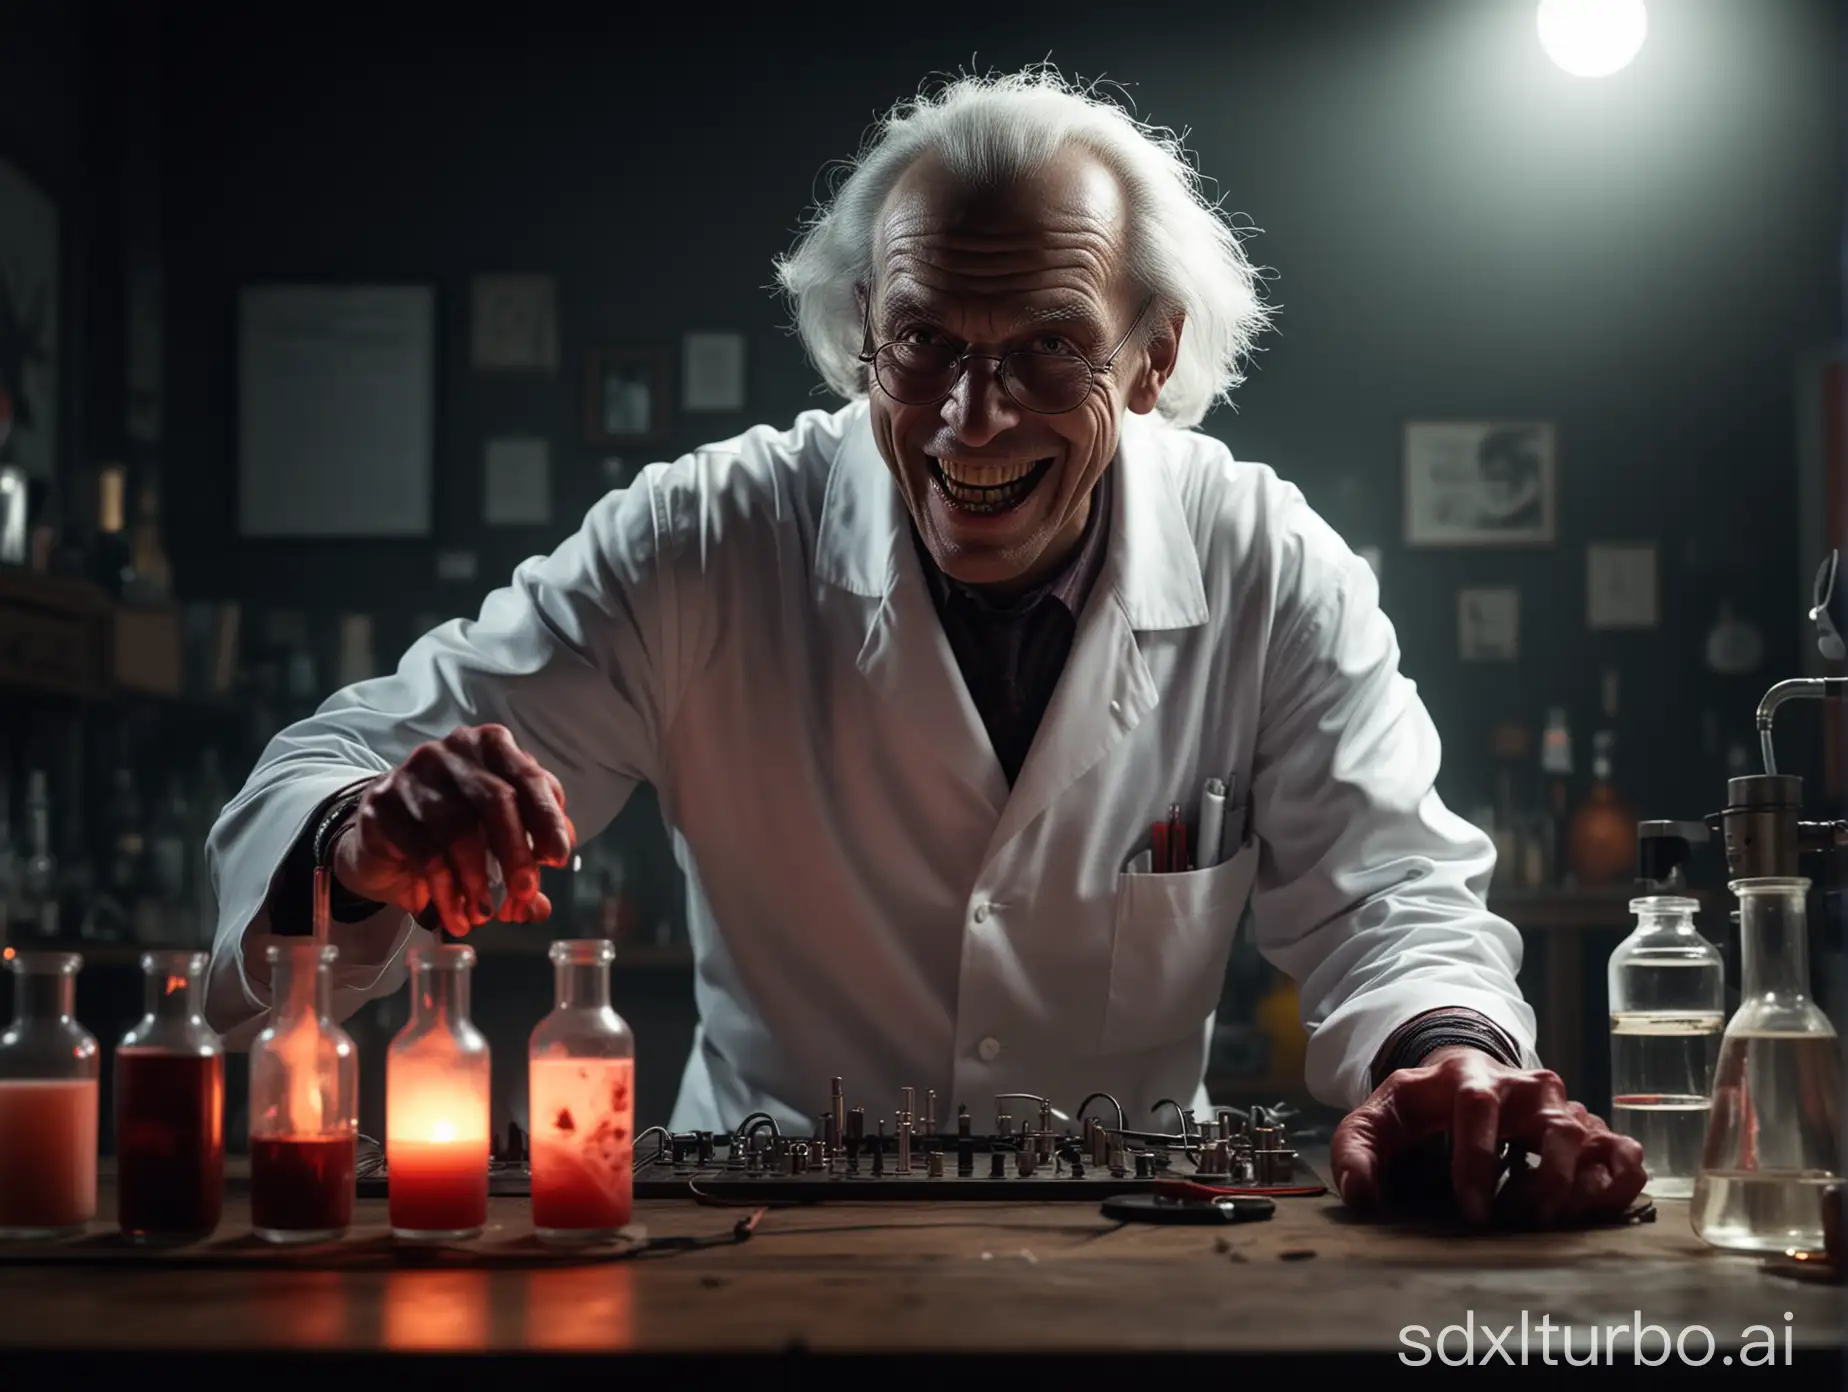 Menacing-Mad-Scientist-Conducting-Wicked-Experiments-Alone-in-Dark-Lab-with-Scary-Red-Lighting